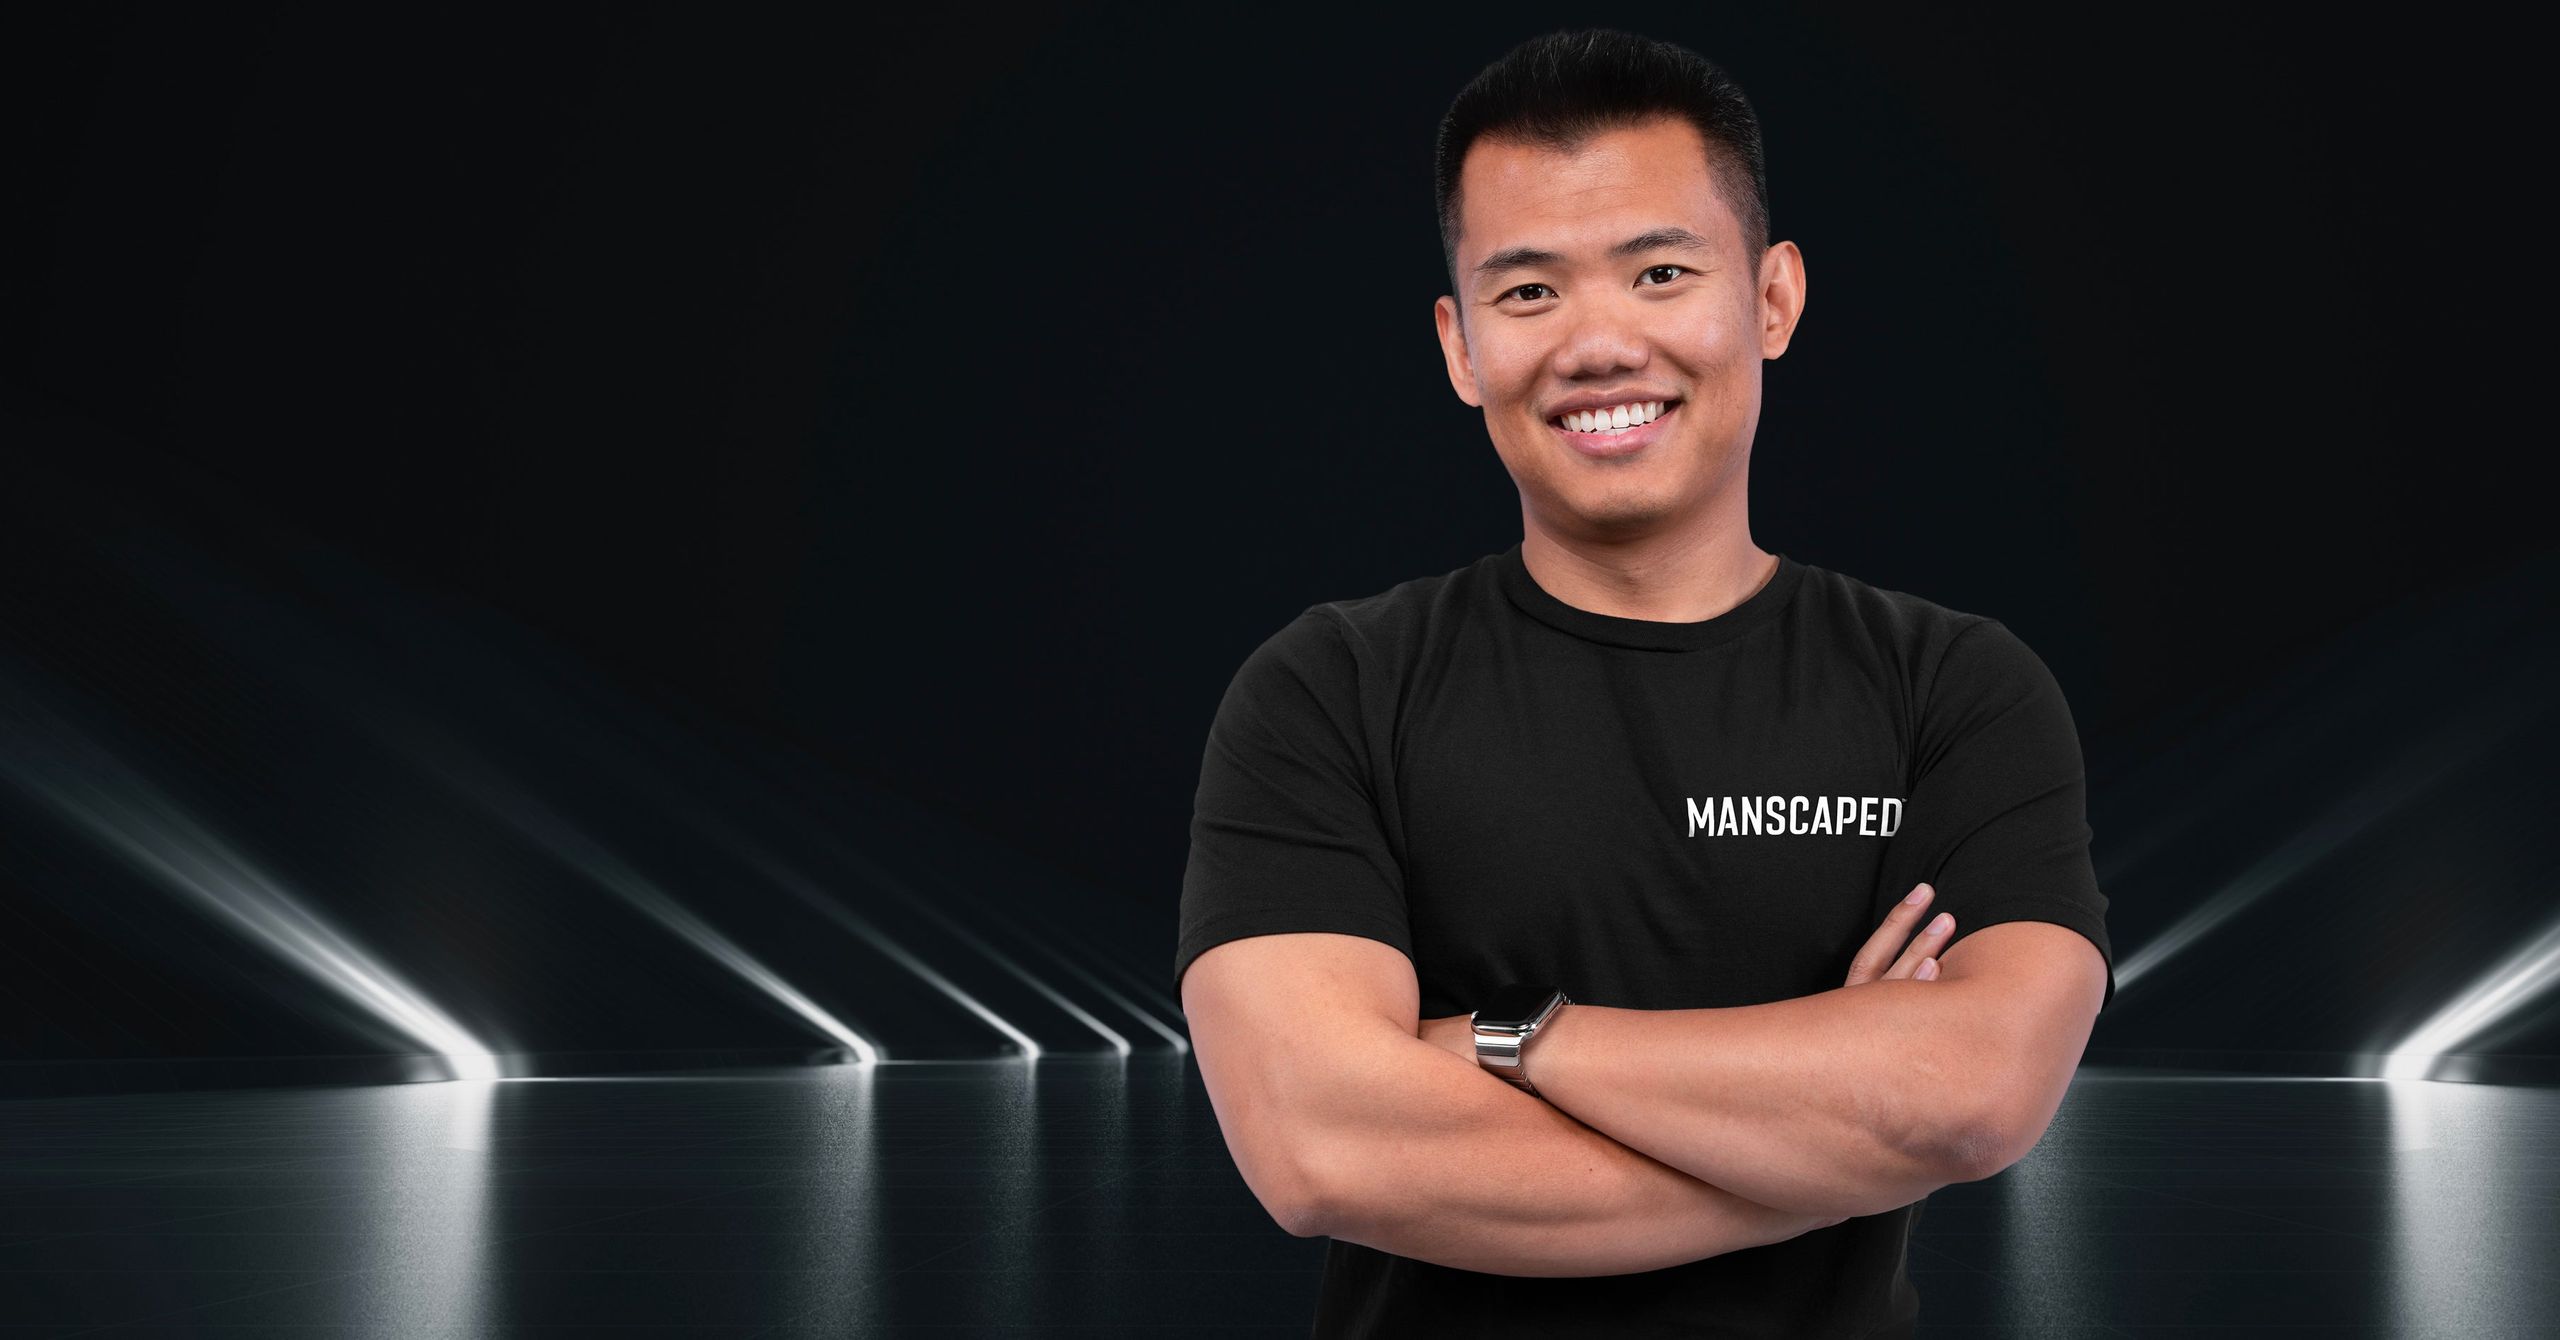 Manscaped Founder Paul Tran